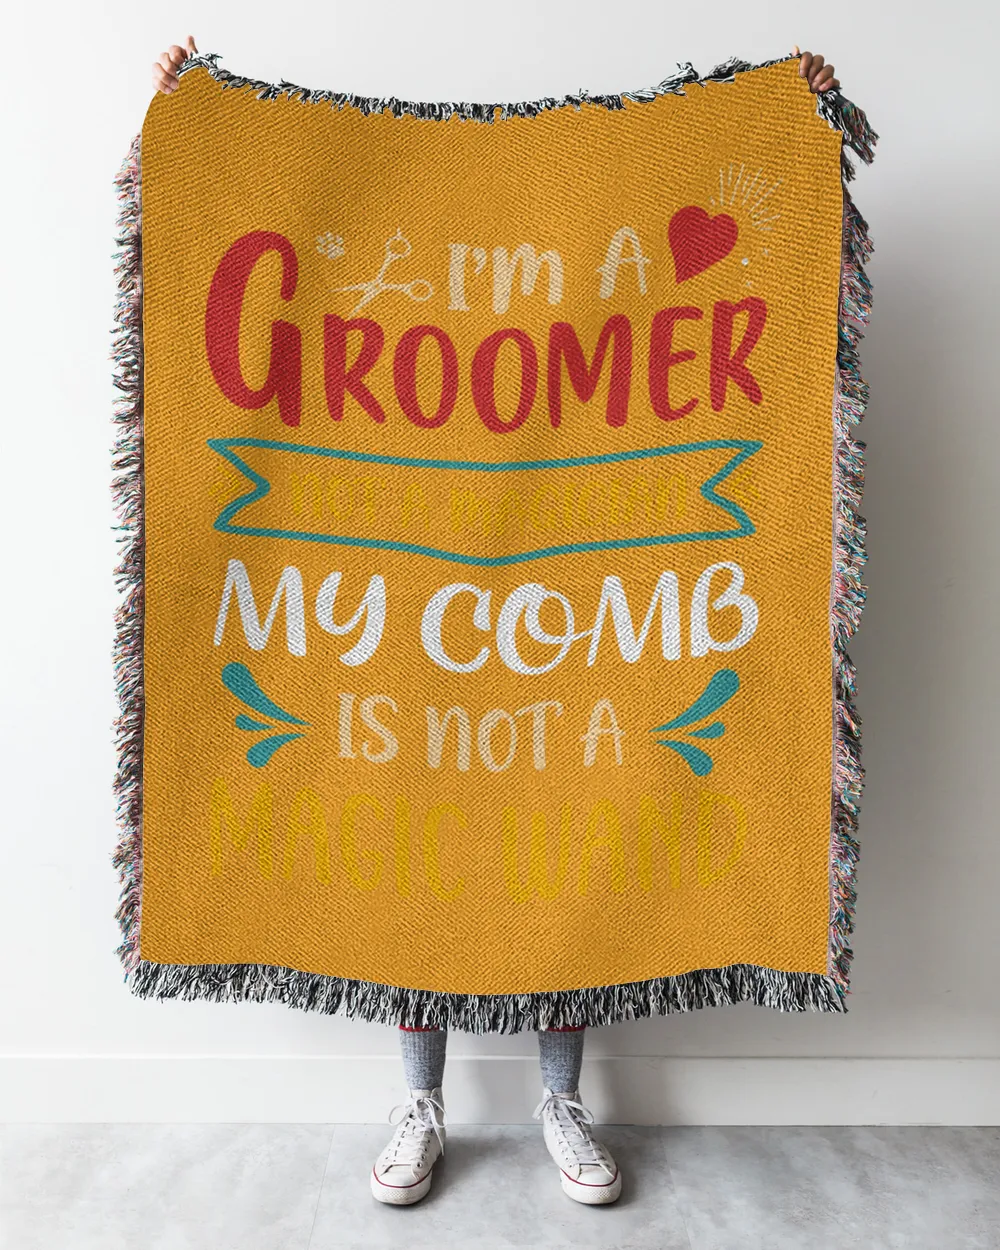 I Am A Groomer Not A Magician My Comb Is Not A Magic Wand